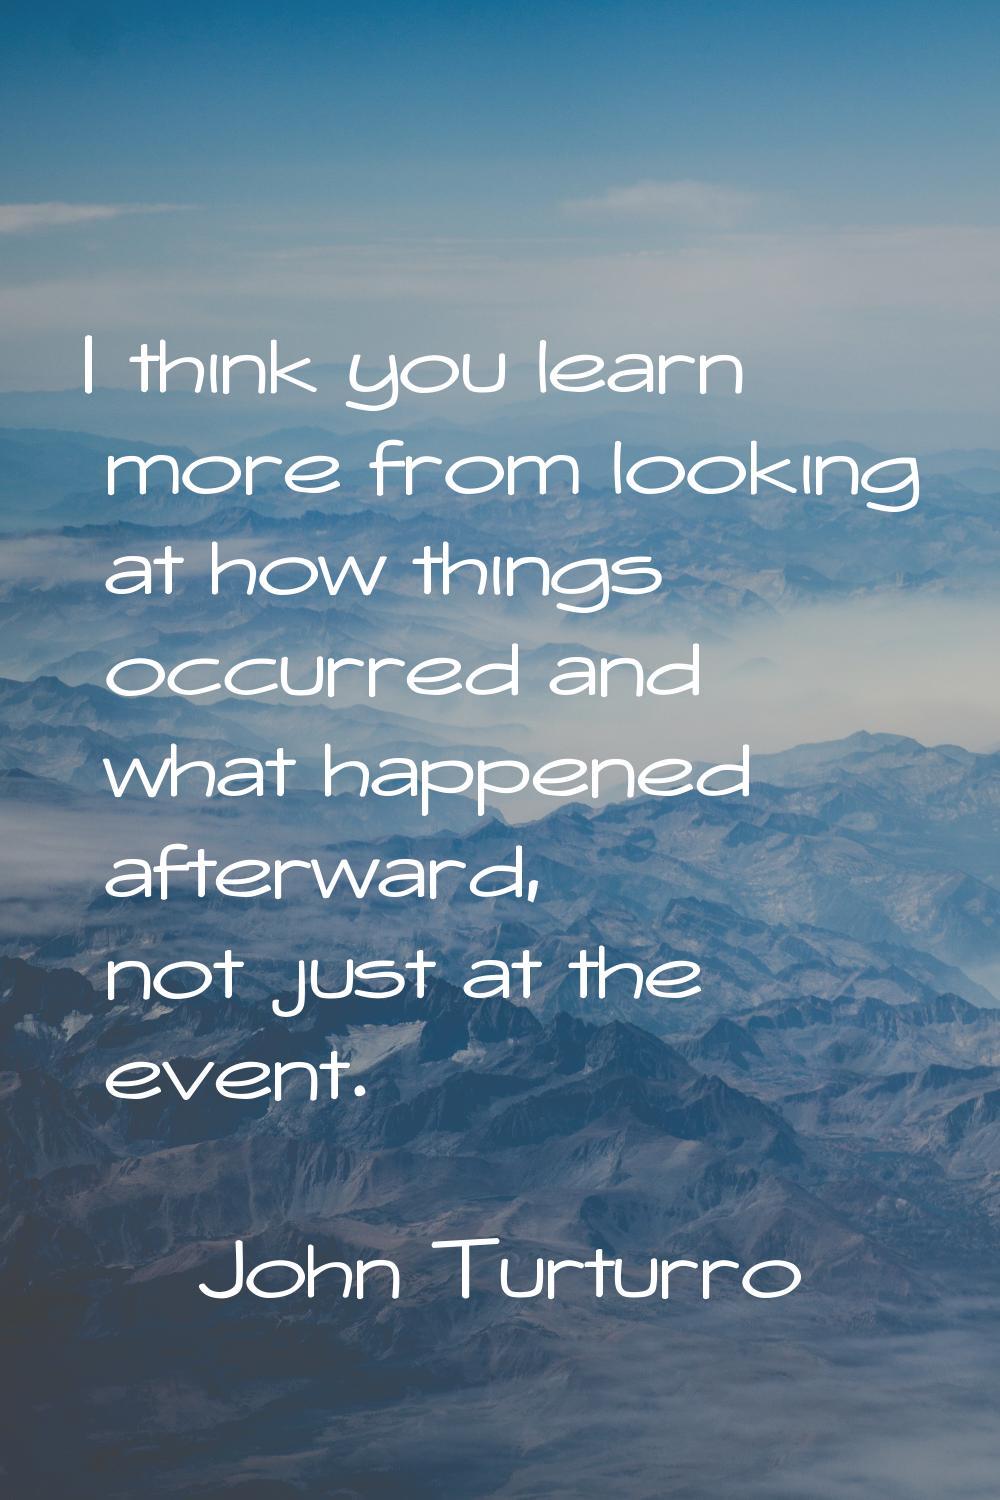 I think you learn more from looking at how things occurred and what happened afterward, not just at